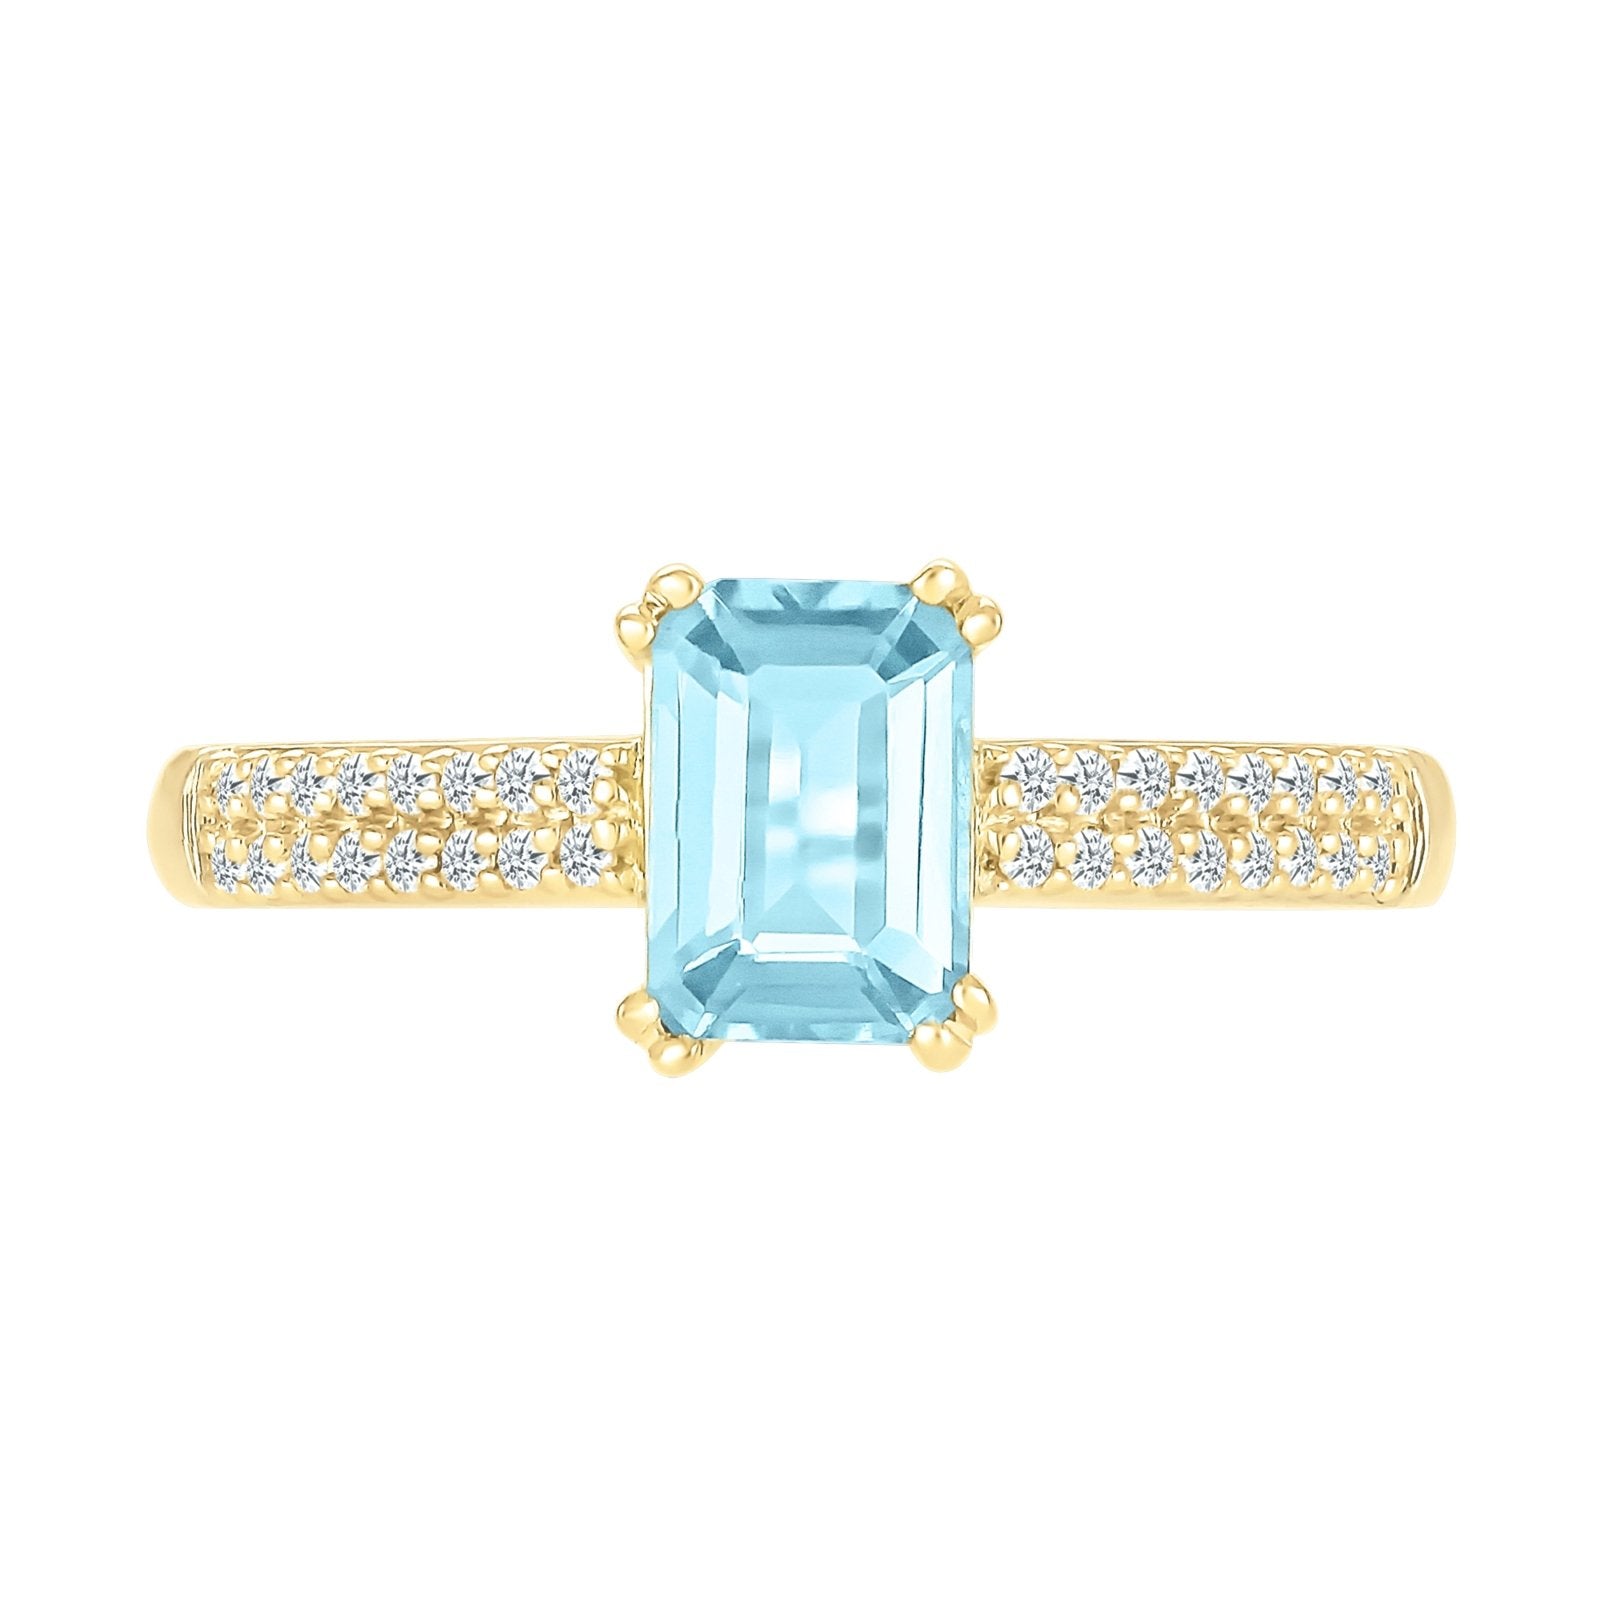 Aquamarine Solitaire Ring on White Sapphire Band Rings Estella Collection #product_description# 32748 Aquamarine Made to Order White Sapphire #tag4# #tag5# #tag6# #tag7# #tag8# #tag9# #tag10#